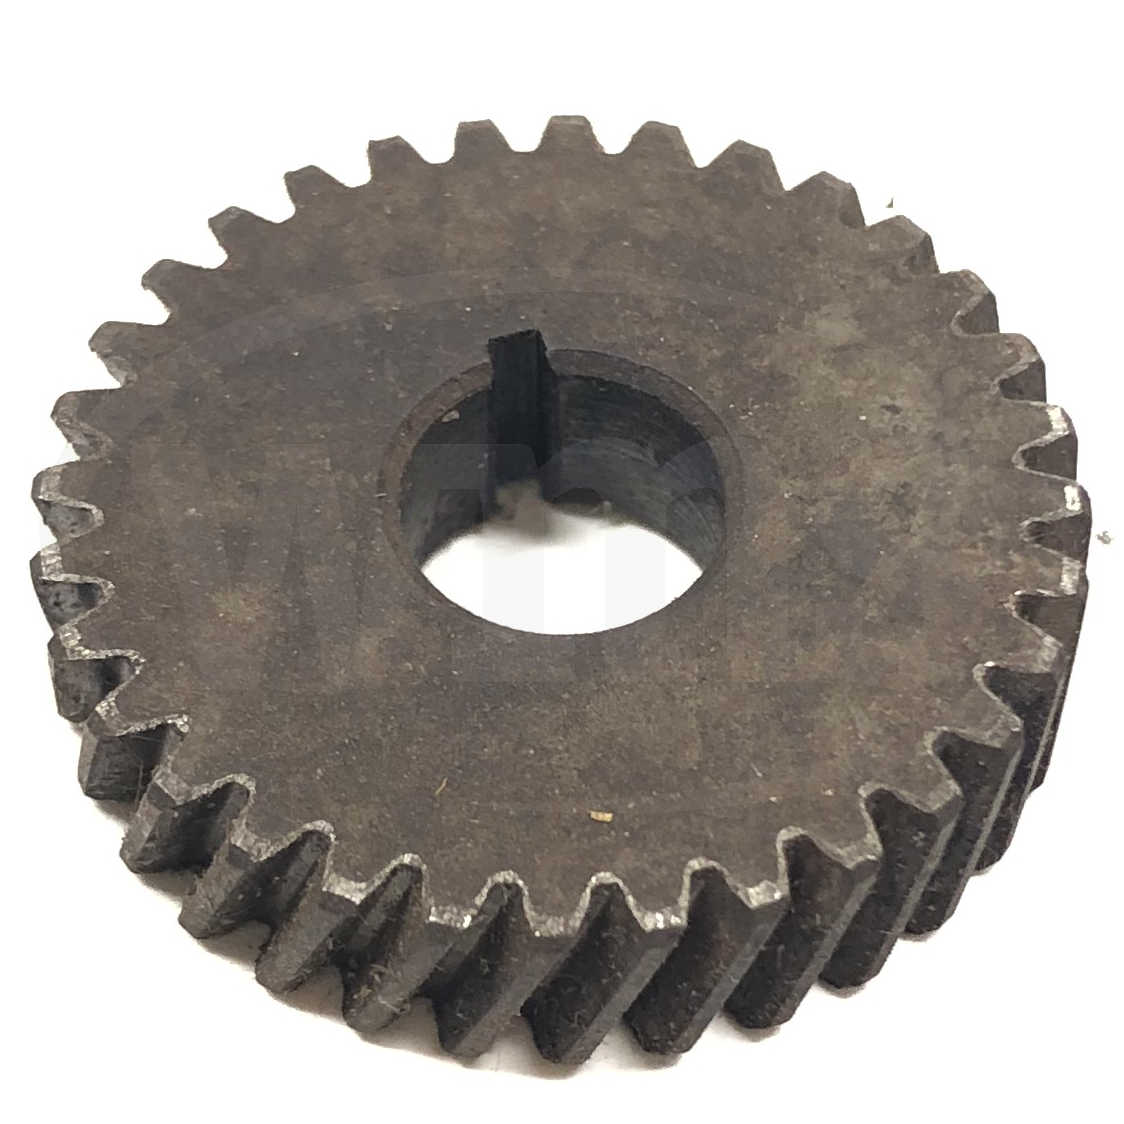 32-75-2800 Milwaukee Spindle Gear